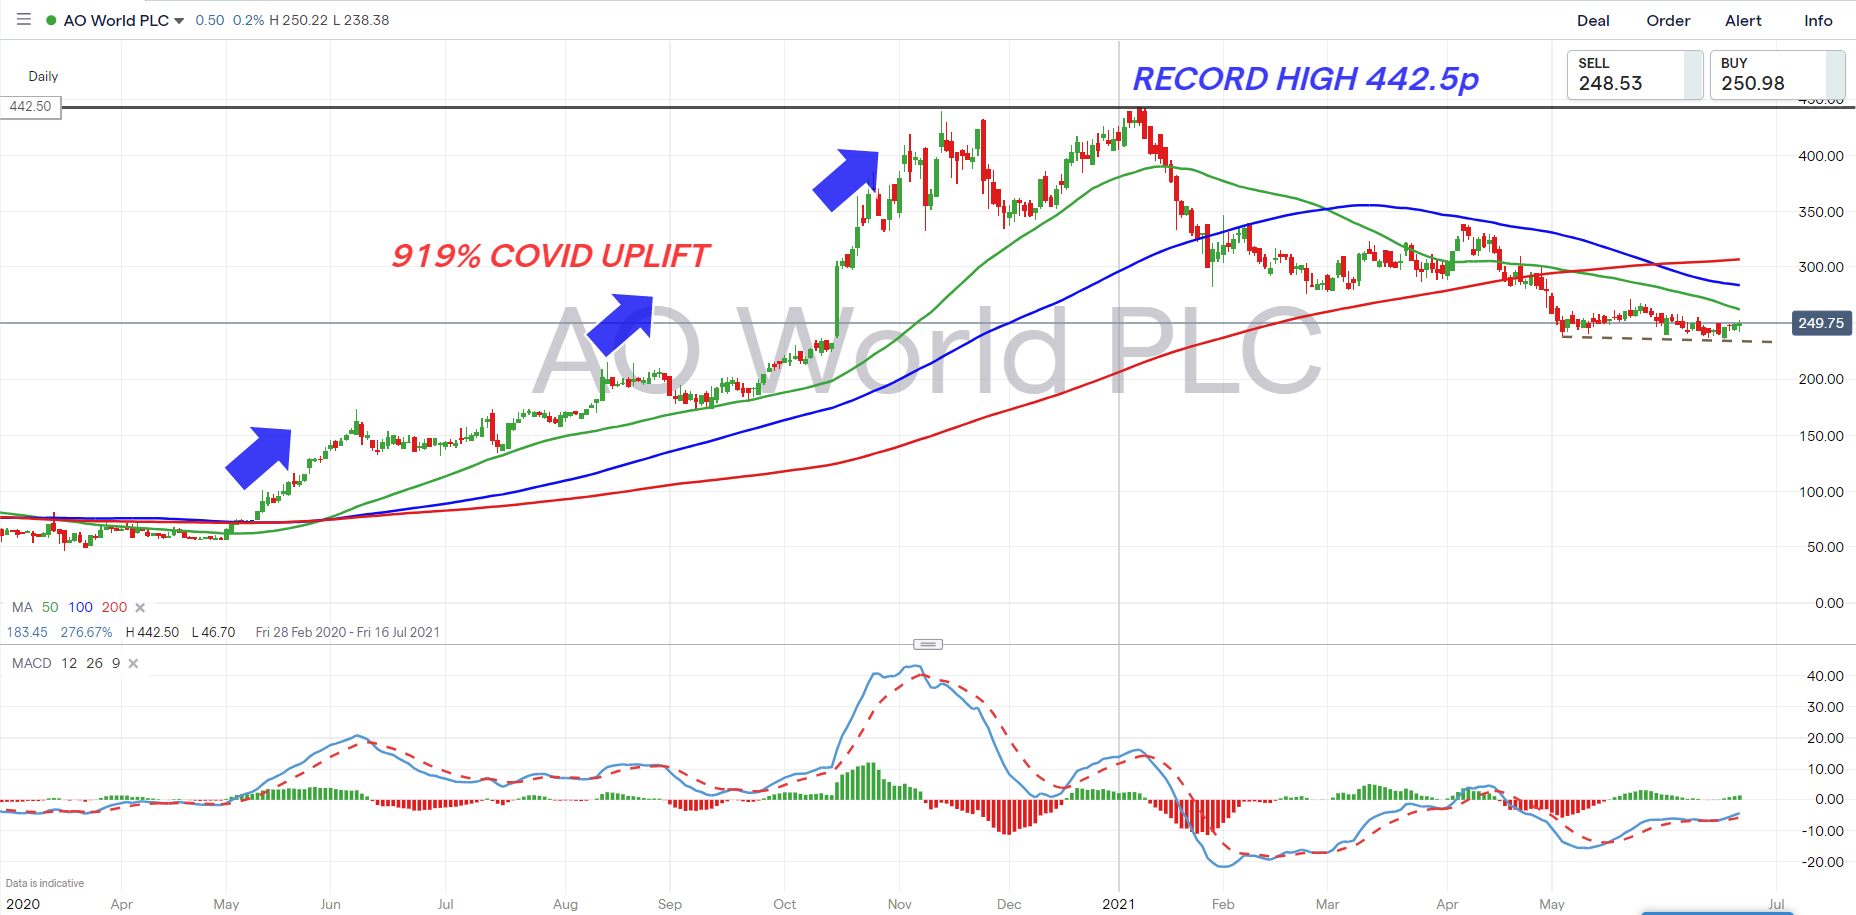 AO World share price: trading the chart